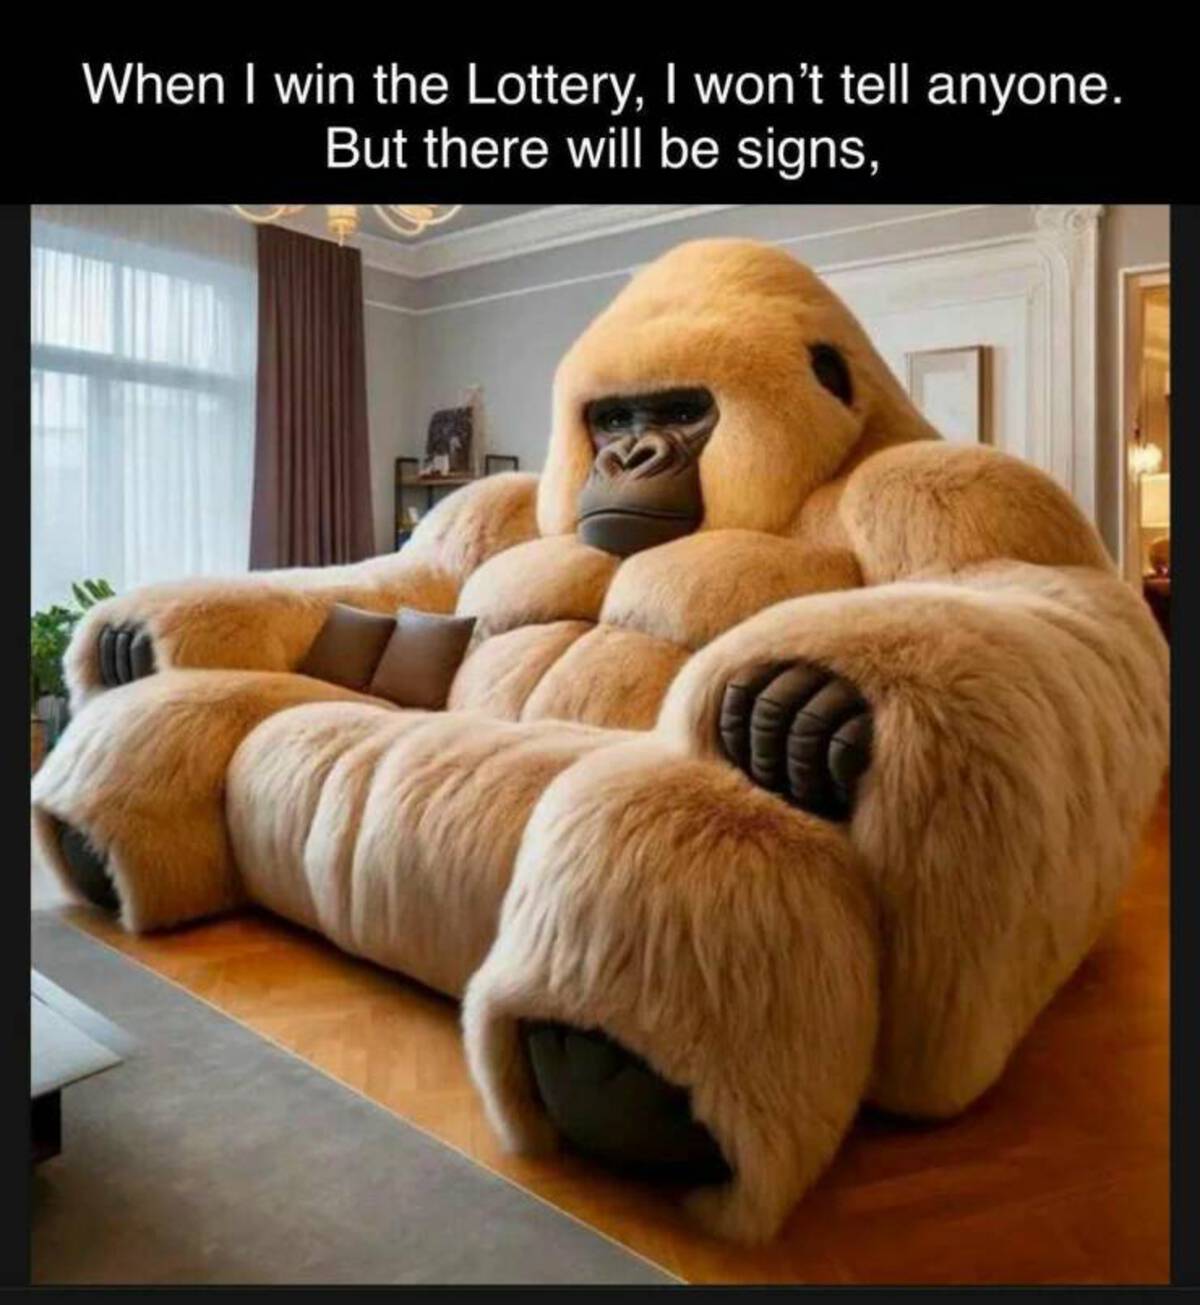 gorilla couch - When I win the Lottery, I won't tell anyone. But there will be signs,